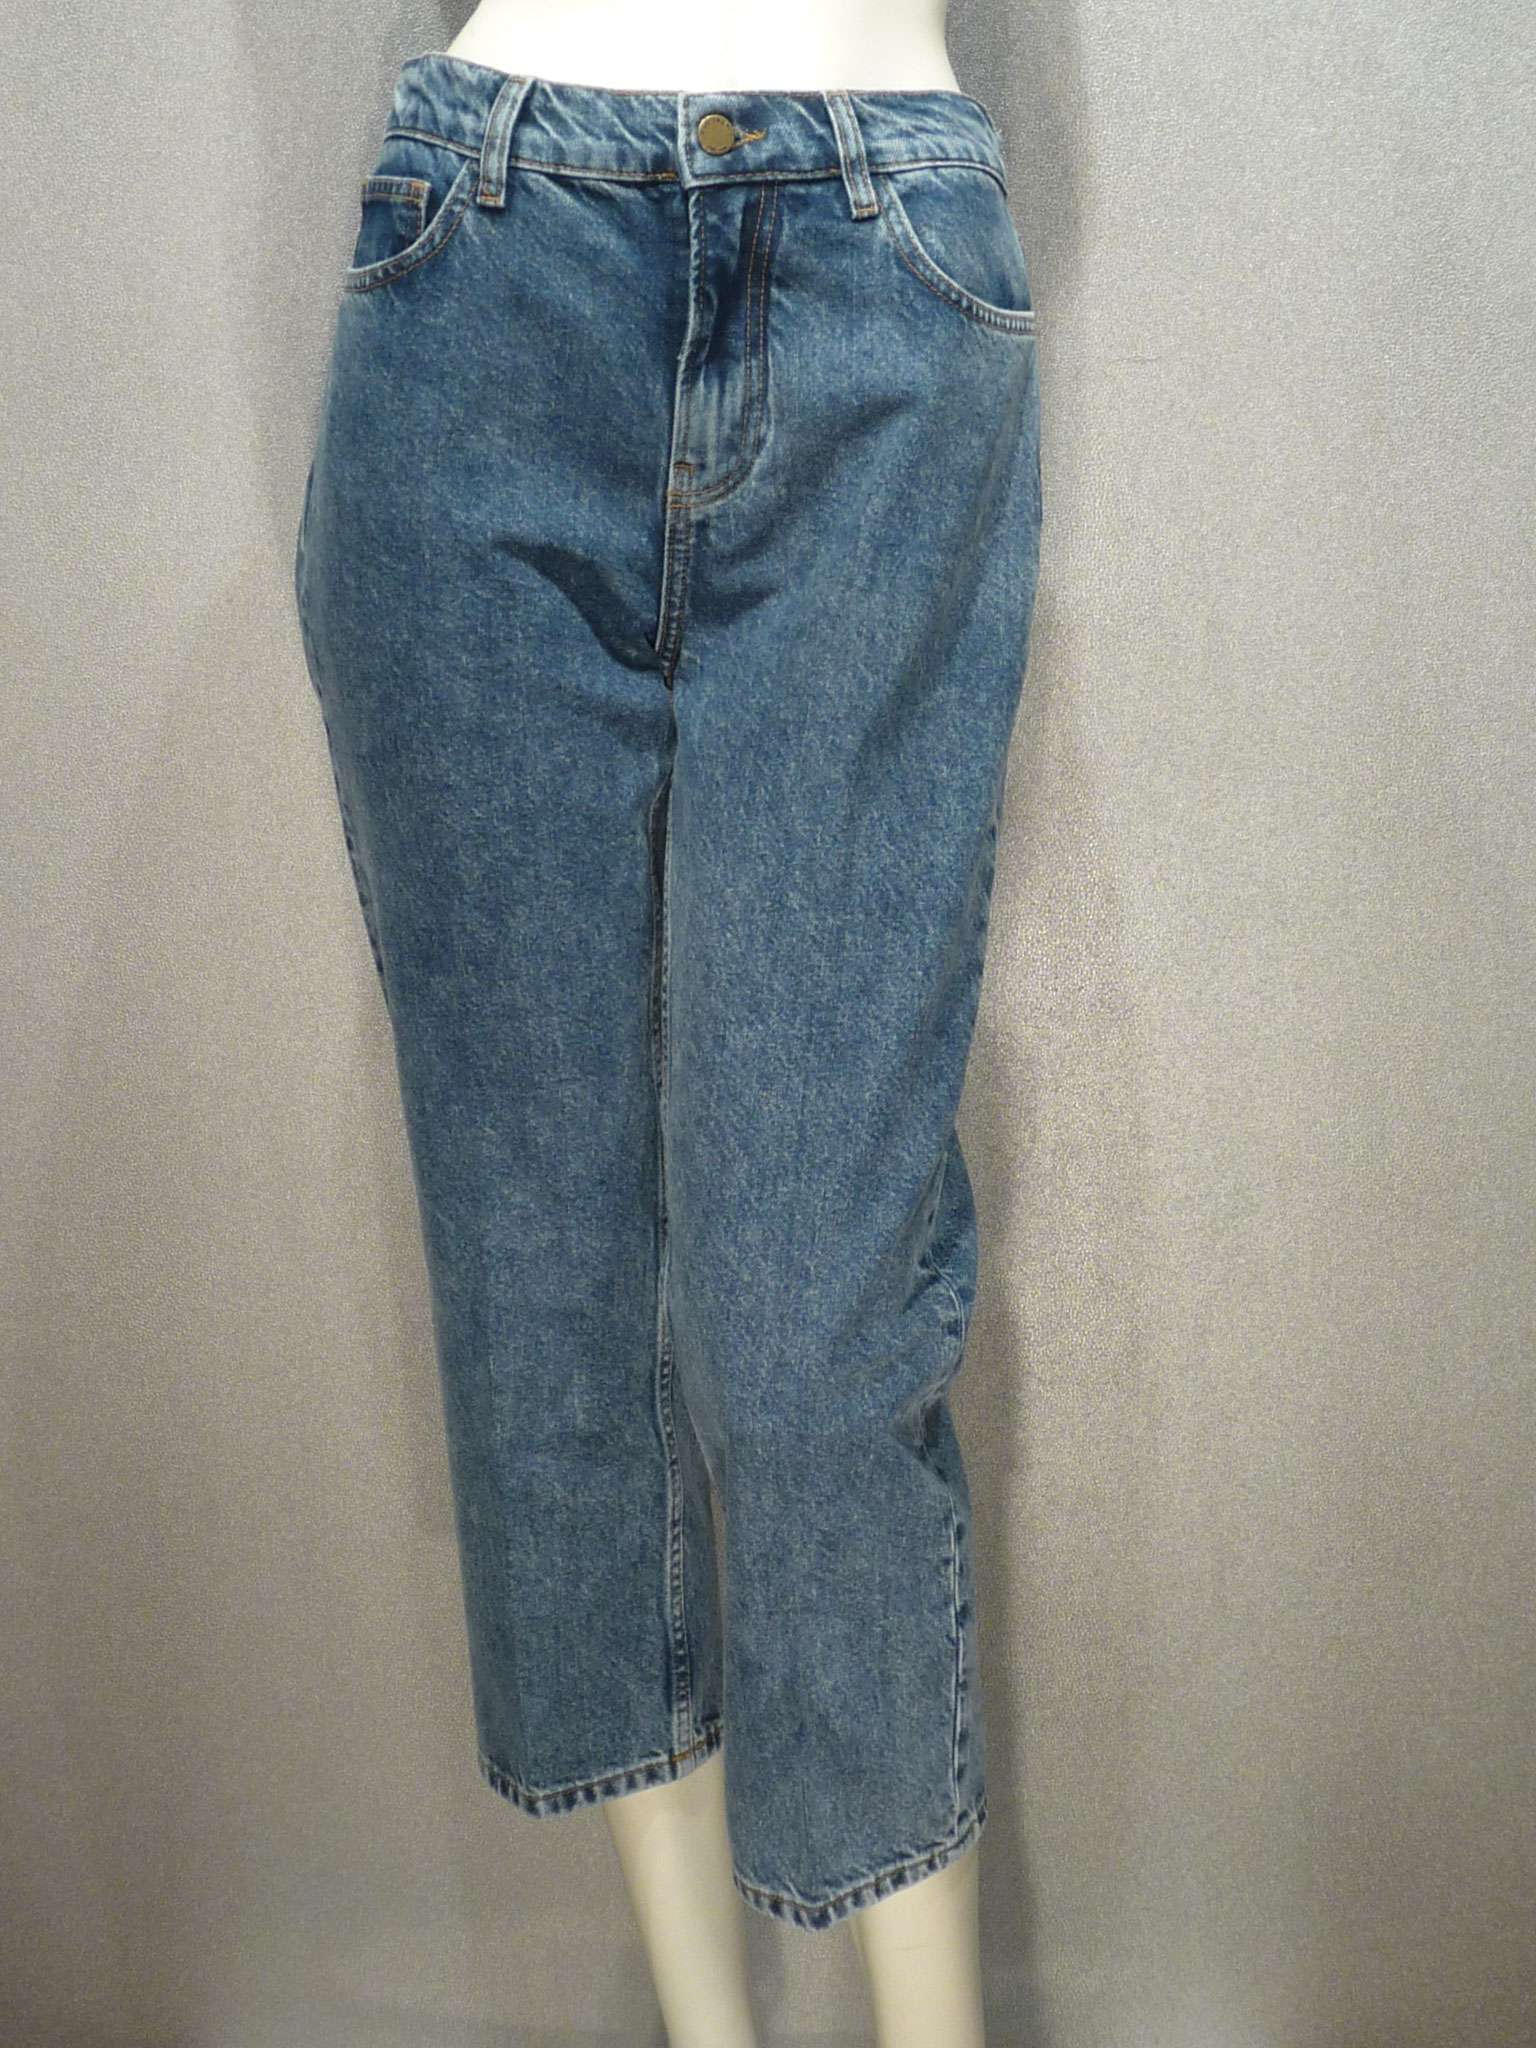 Jeans 298,- €